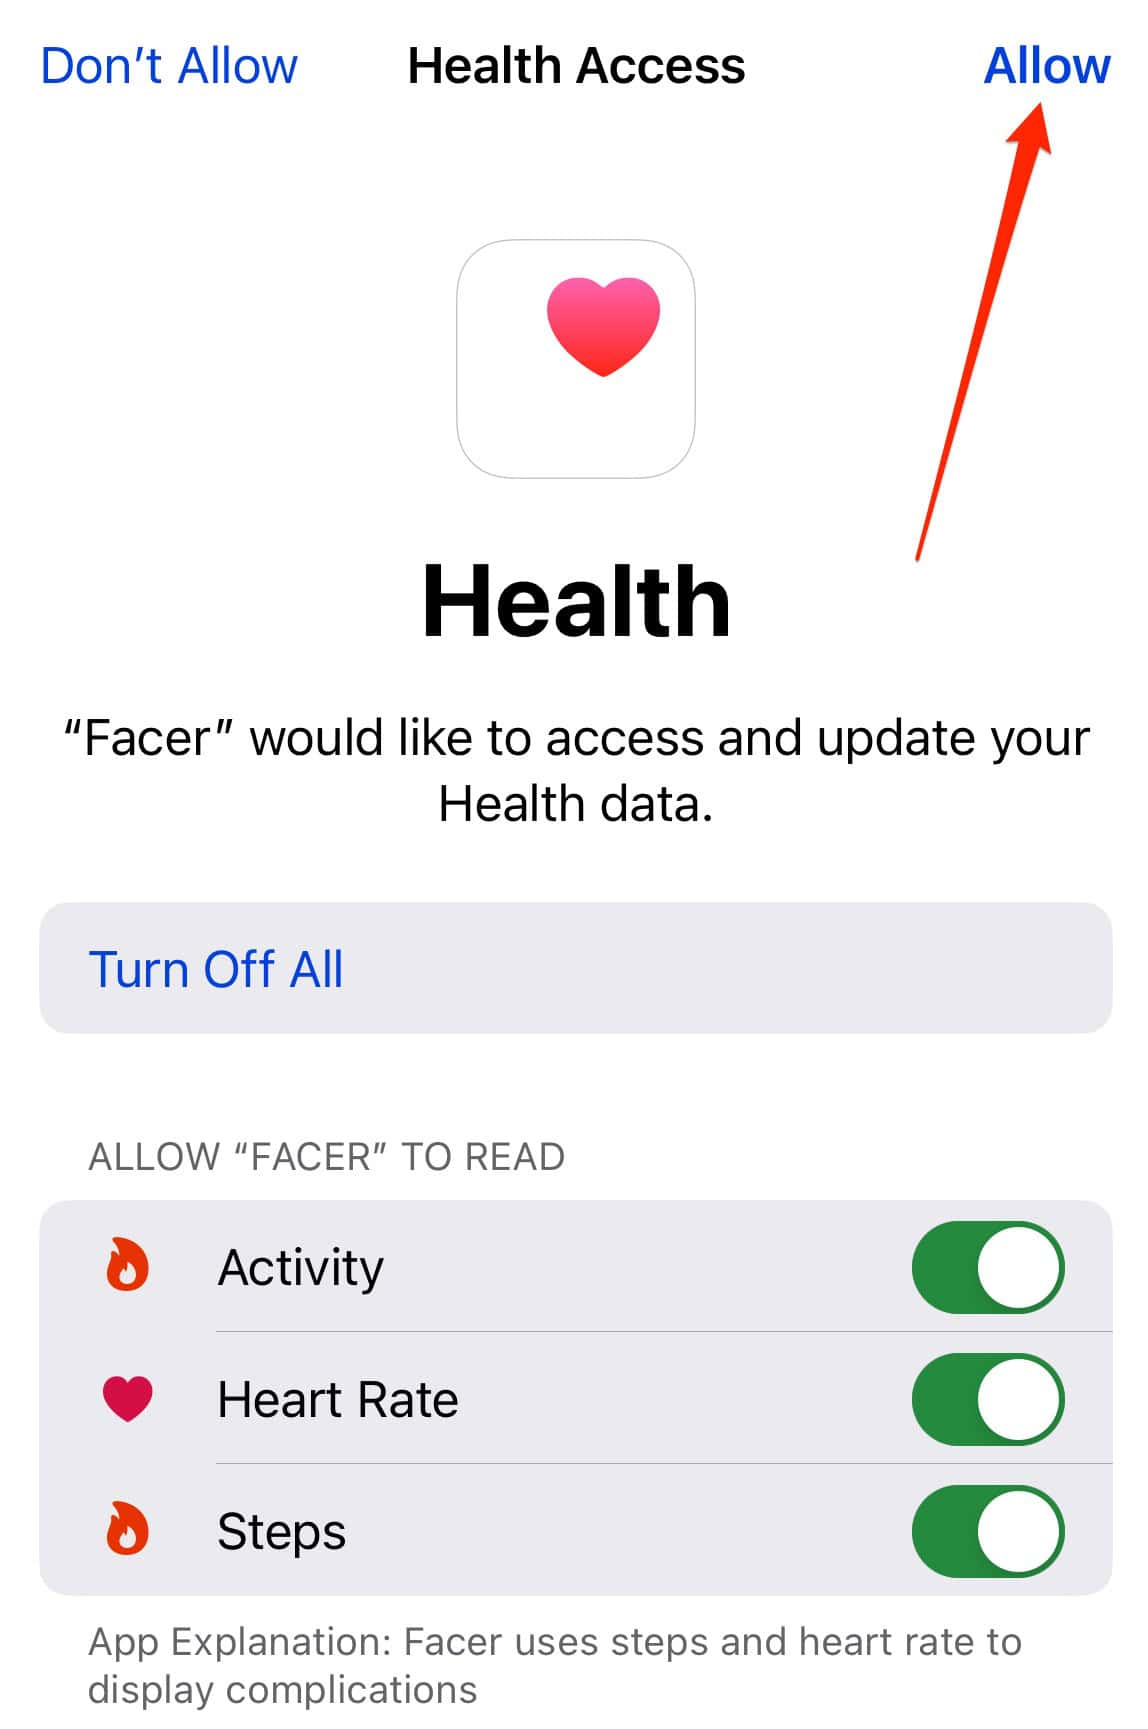 Enable Access to Facer via the Health app